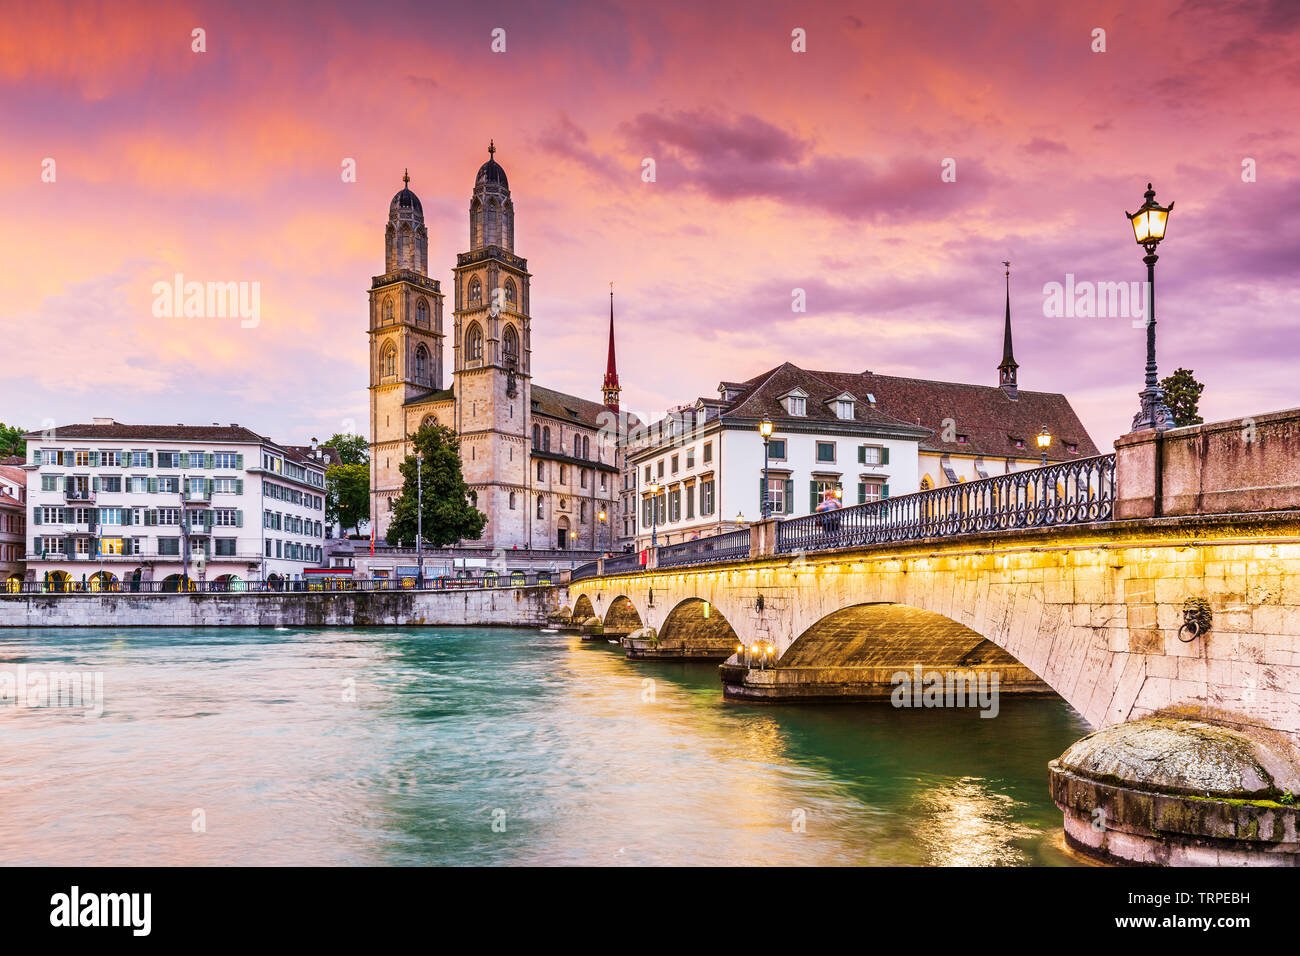 Zurich, Switzerland. View of the historic city center with famous Grossmunster Church, on the Limmat river. Stock Photo